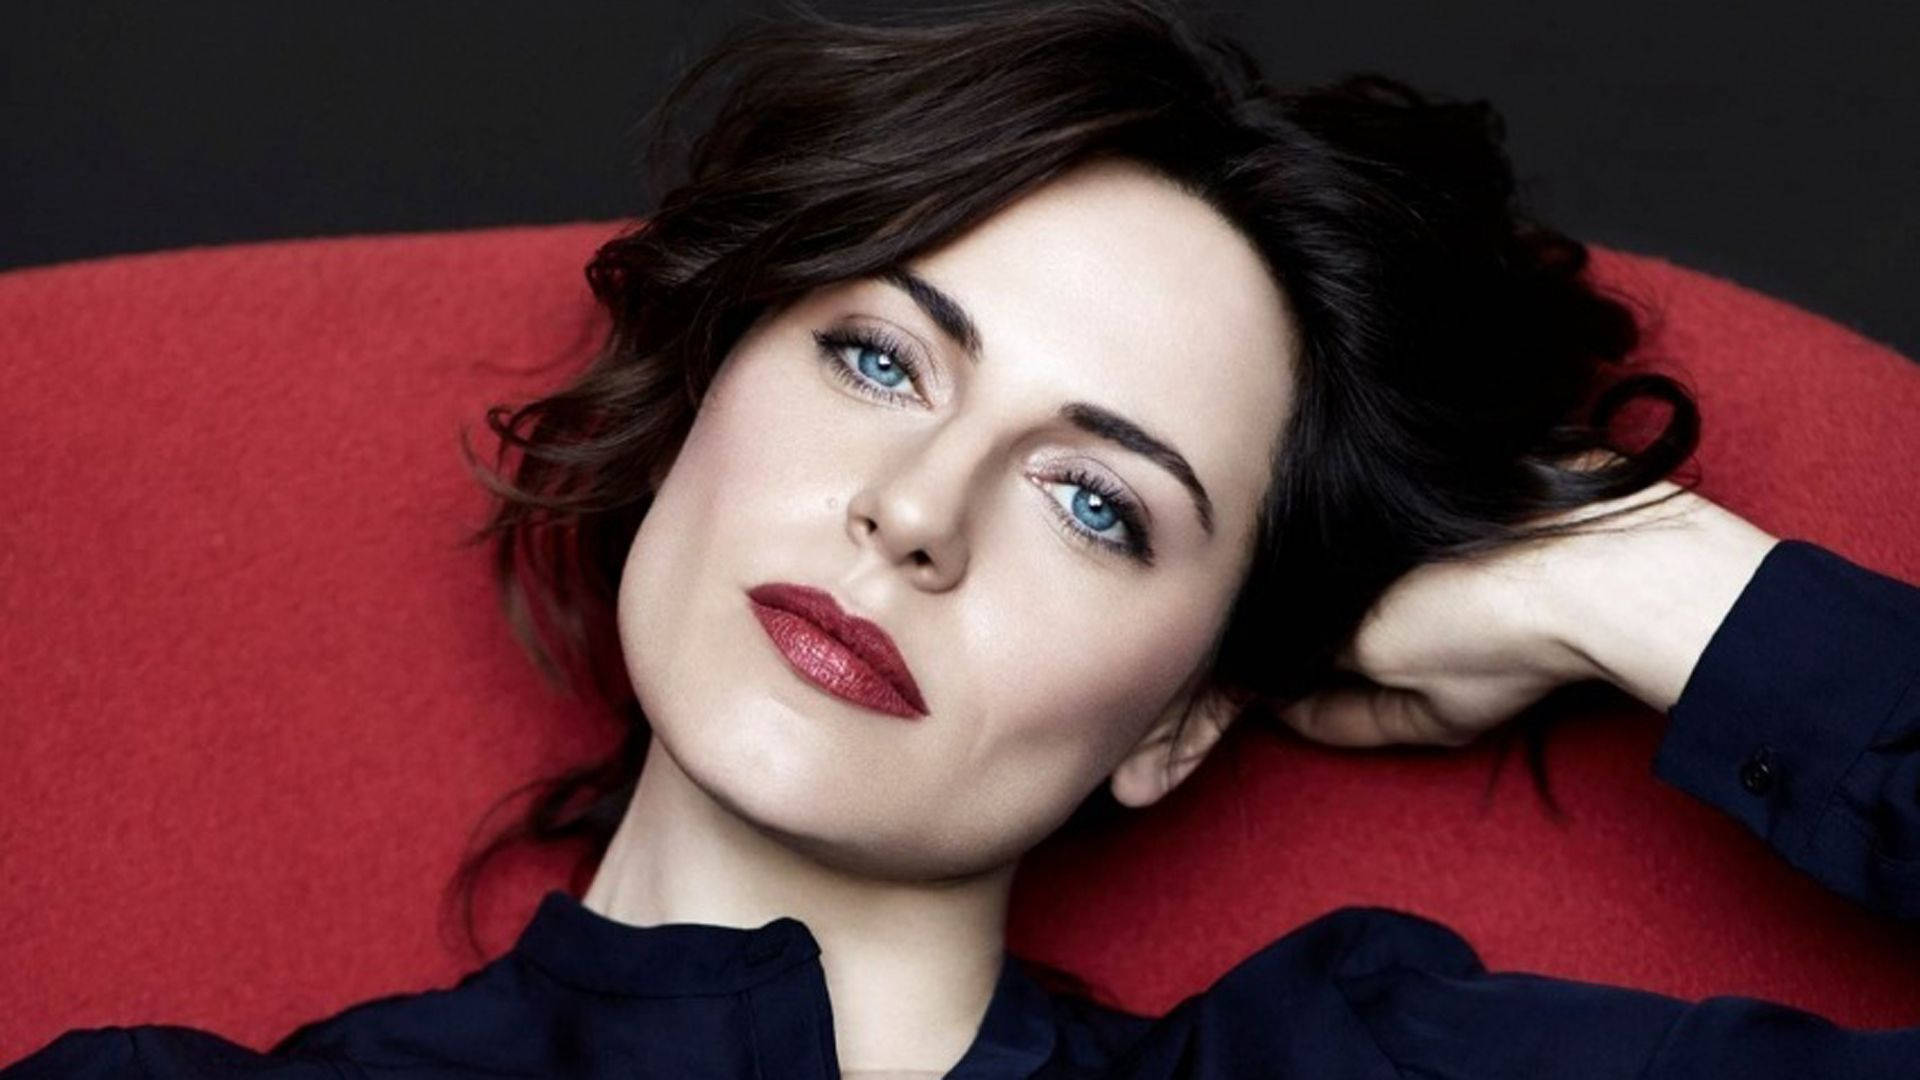 Caption: Antje Traue in Chic Red Chair Wallpaper